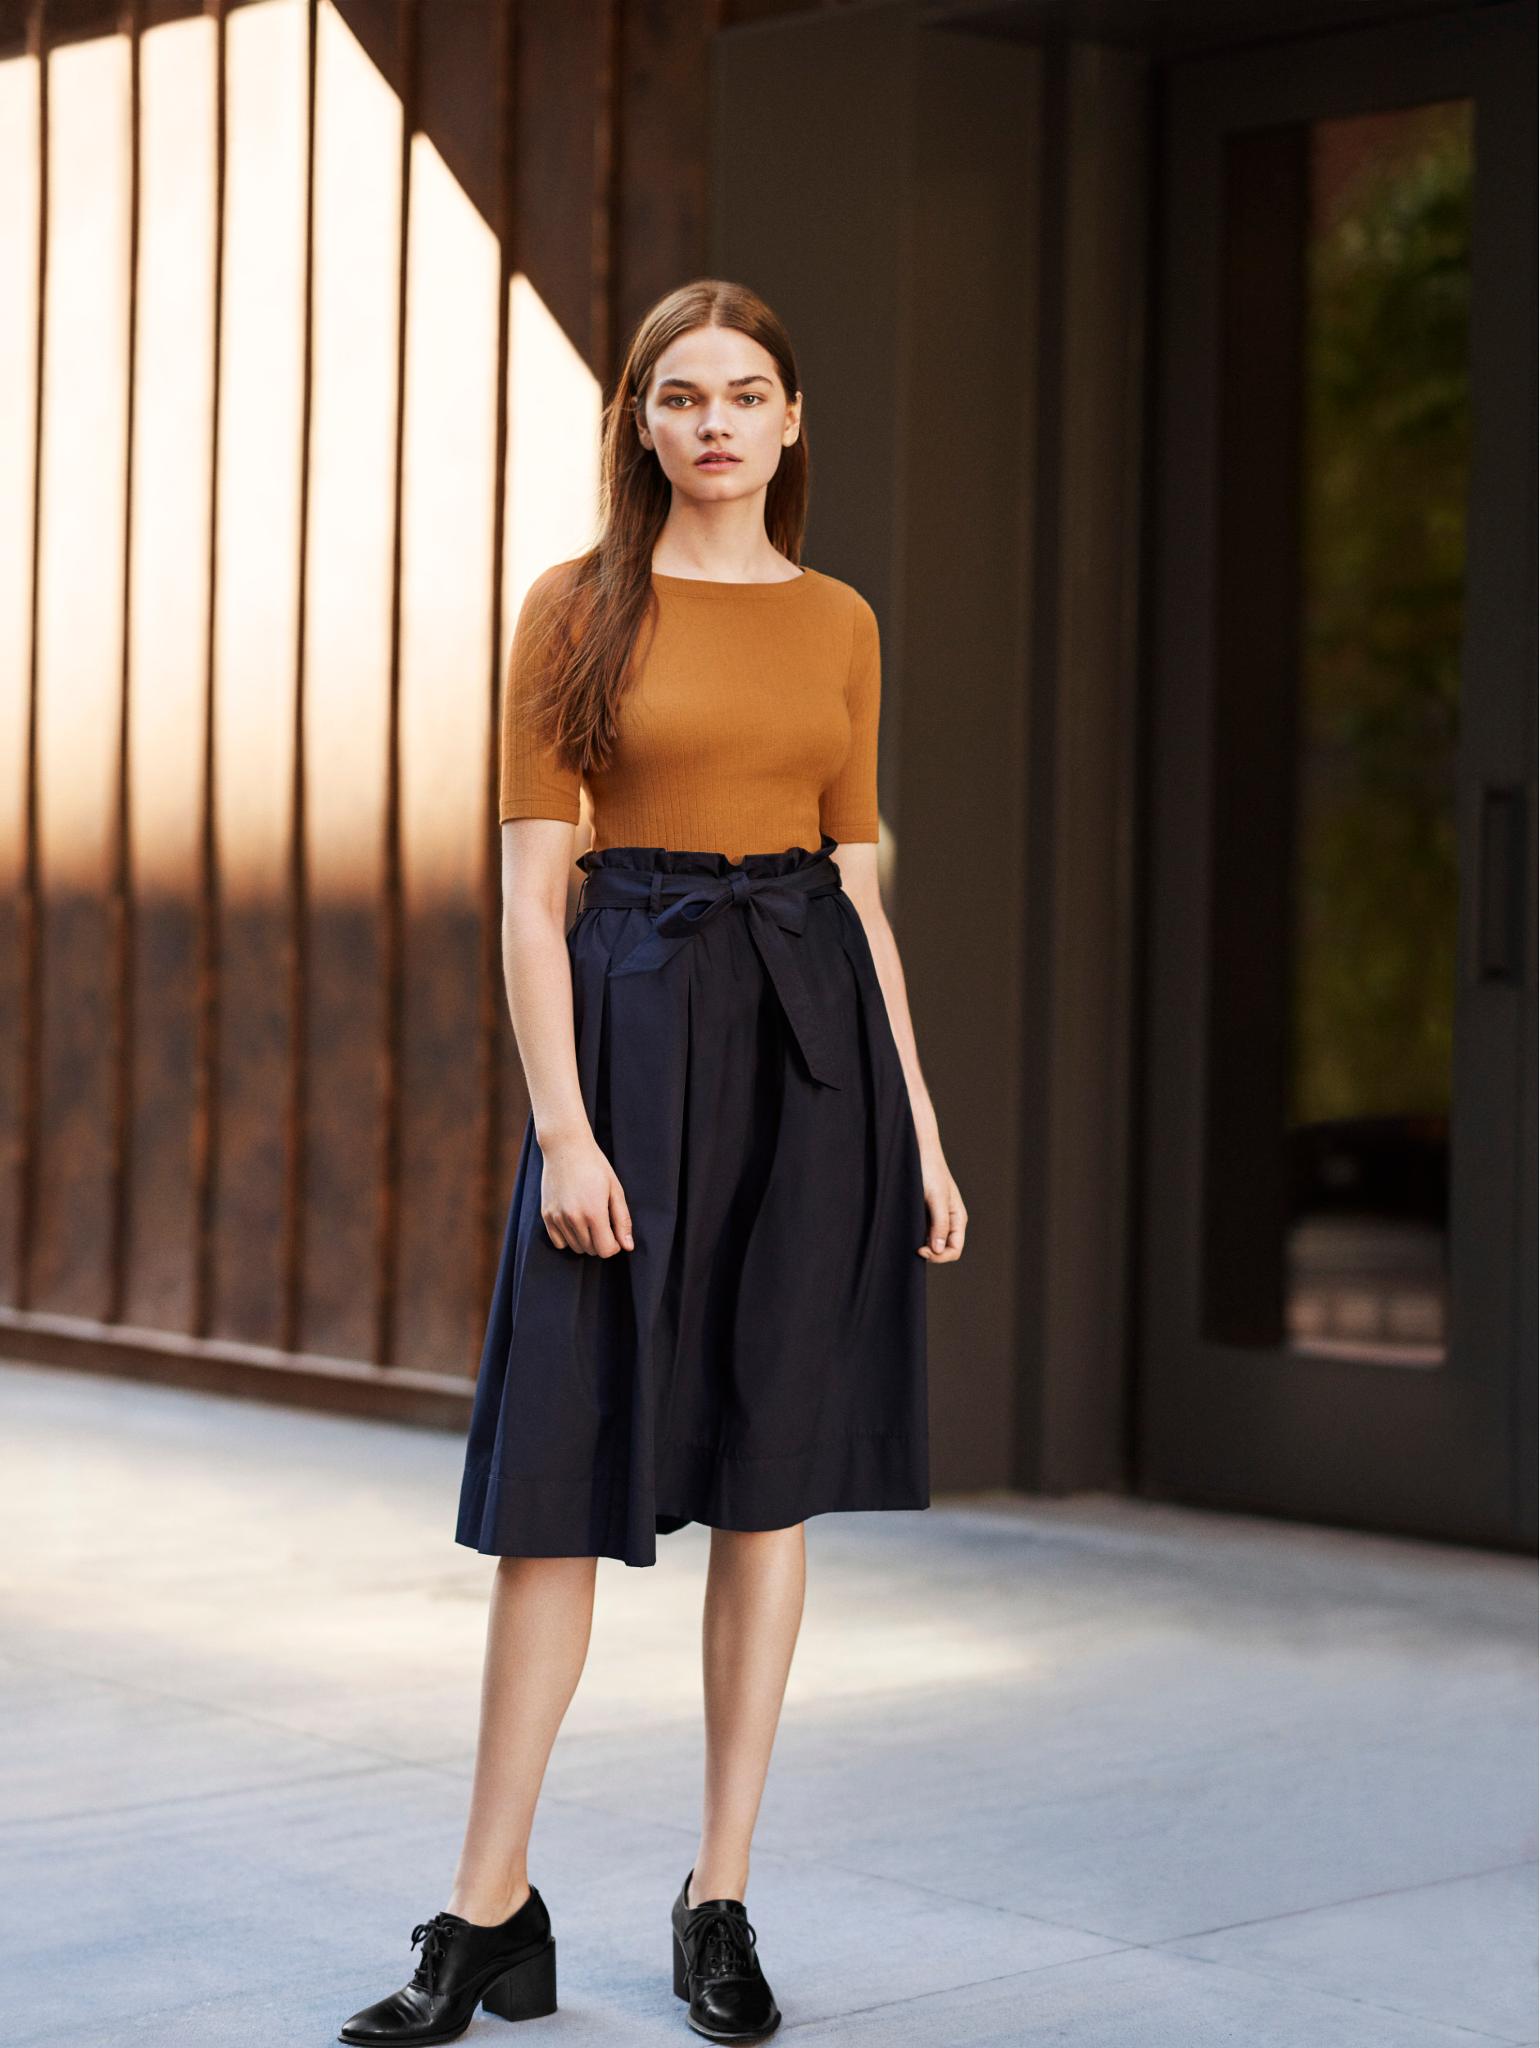 UNIQLO on Twitter: "Our High Waist Belted Flare Midi Skirt features a  modern cut that creates a flattering leg-lengthening effect.  https://t.co/0oOS4DF35T https://t.co/h1i96jOqct" / Twitter